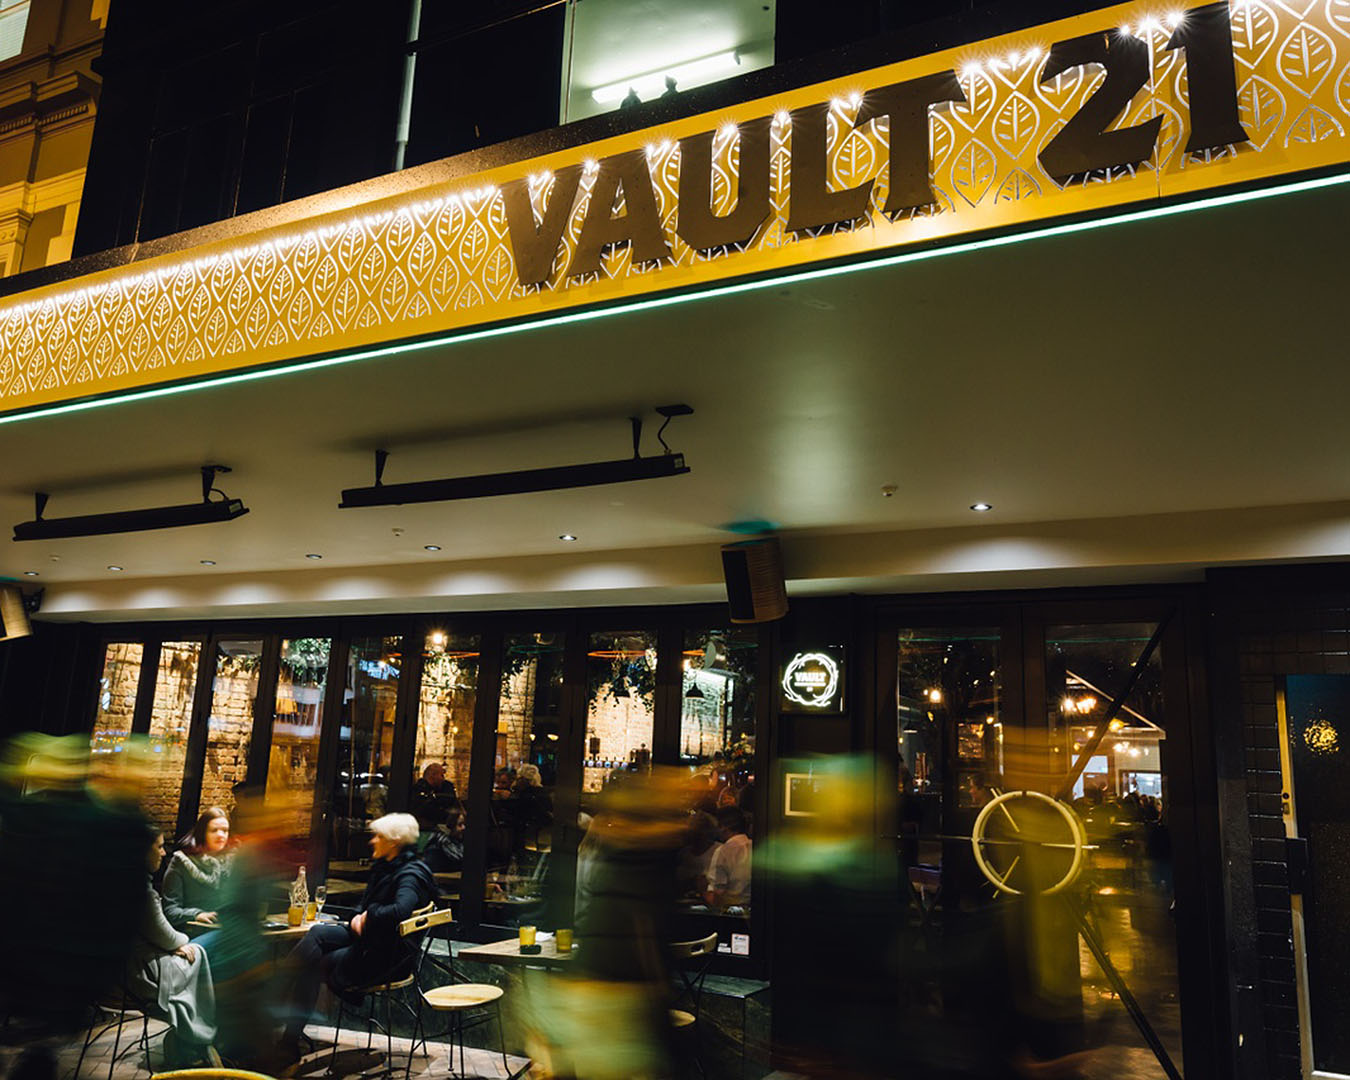 People sit outside Vault 21 which is lit up with a yellow hue.